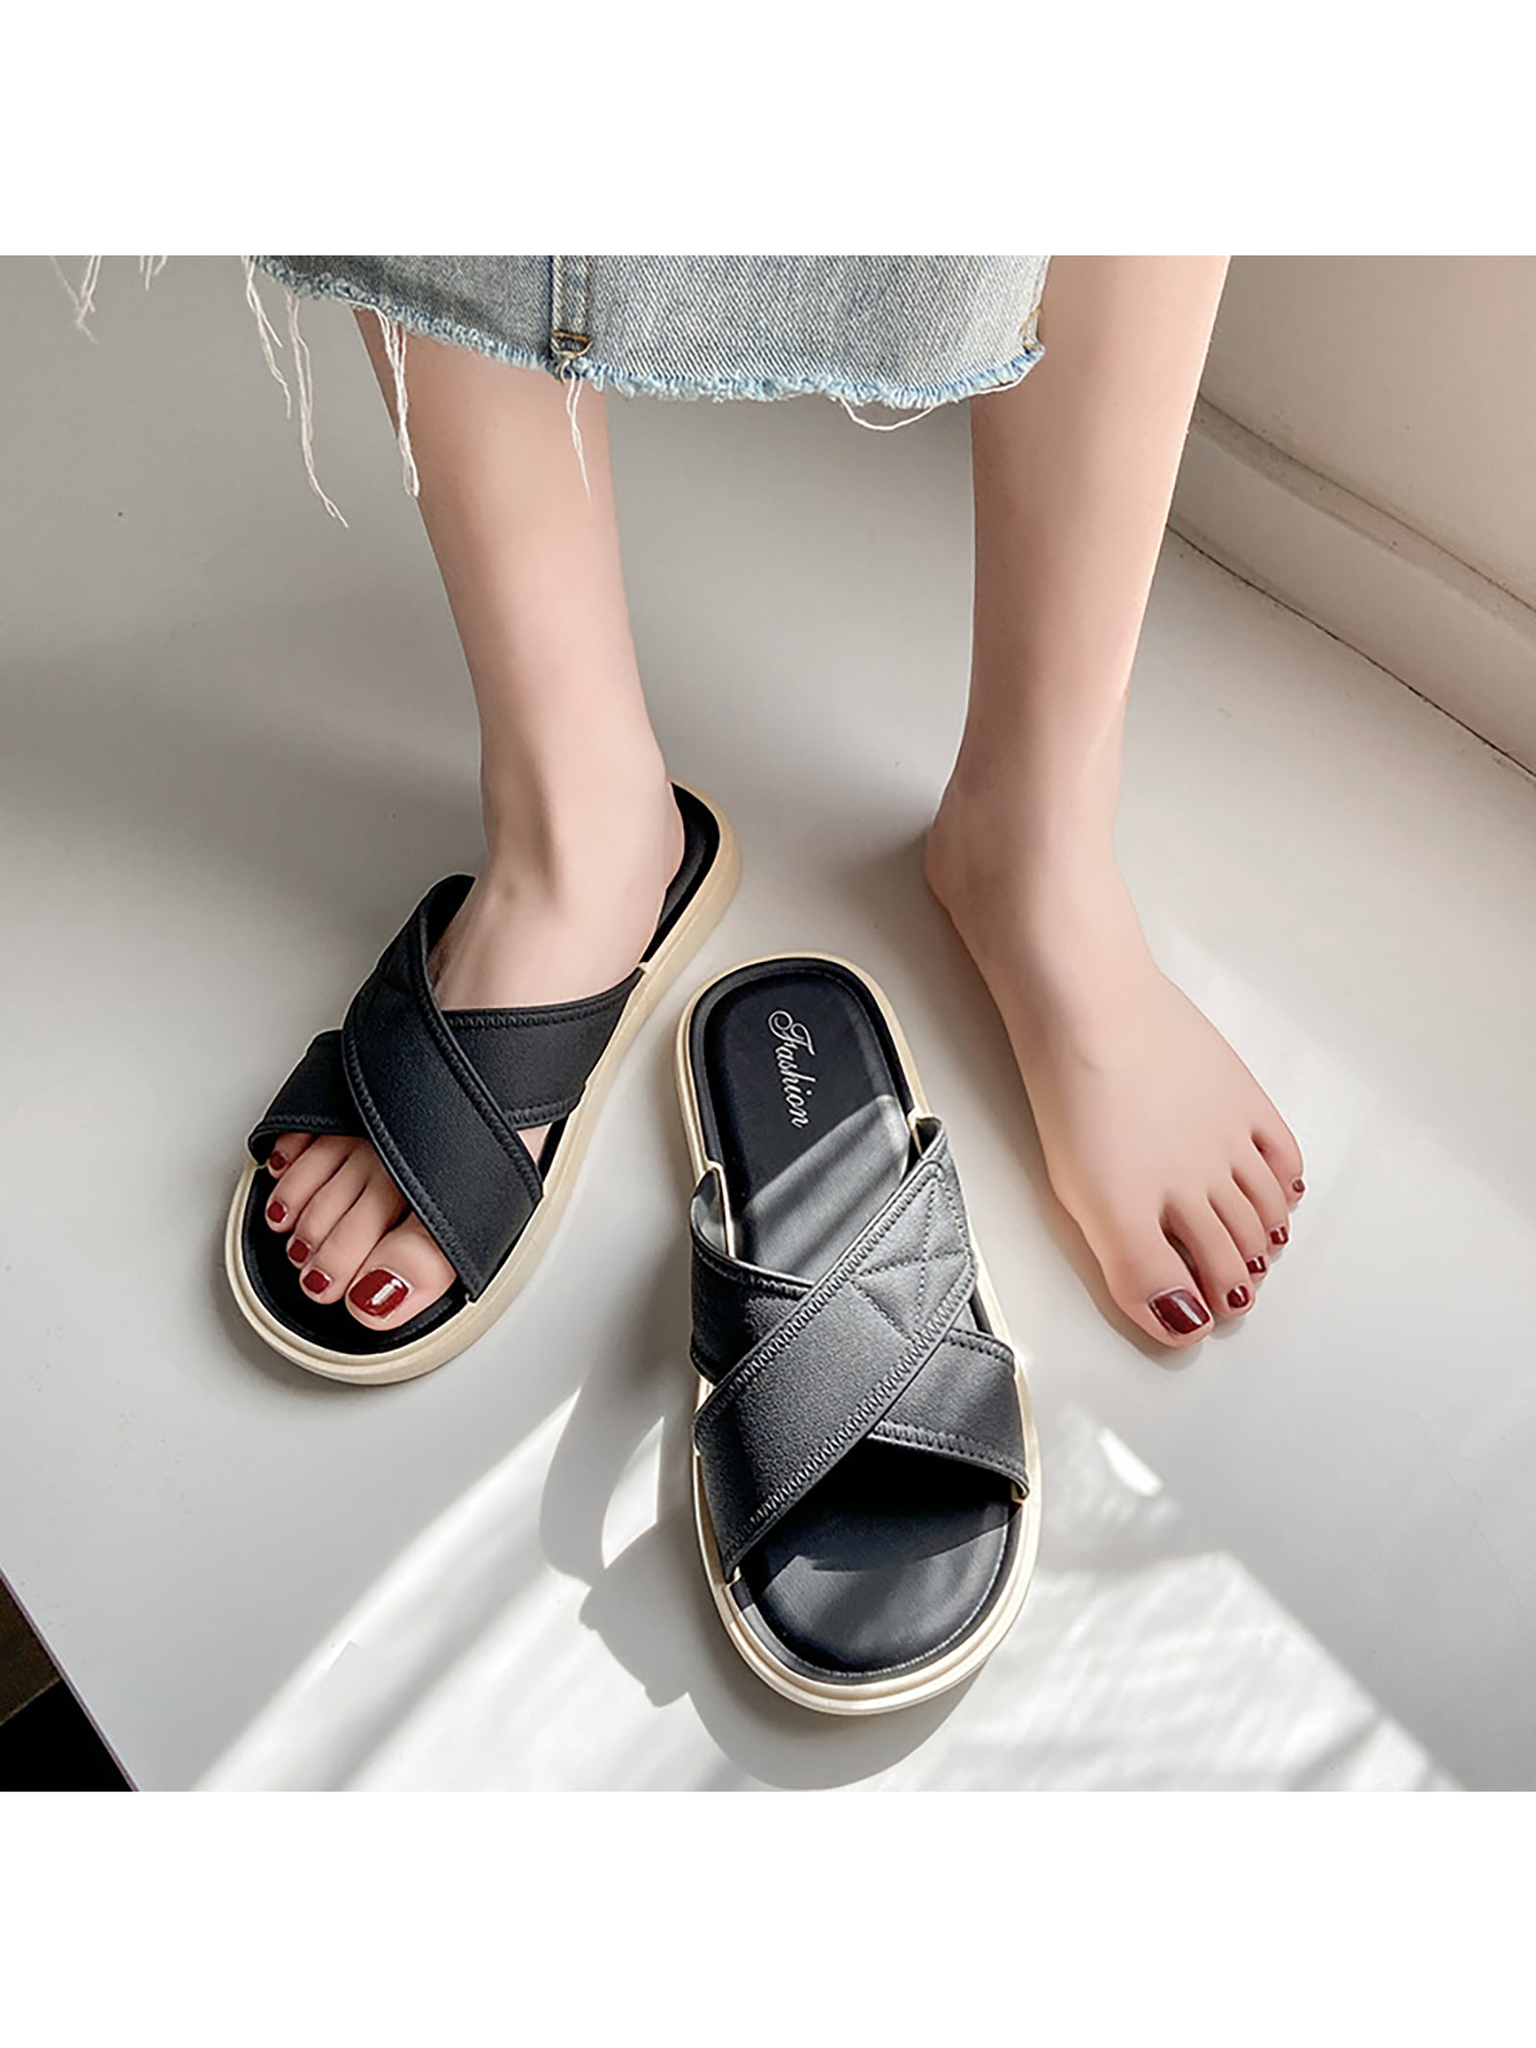 New Arrival Fashionable Simple Elegant Slippers For Home, Bathroom And Outdoor With Soft Pvc Slip-Resistant Bottom, Suitable For Indoor And Outdoor Wear, Fashion Style-Black-4